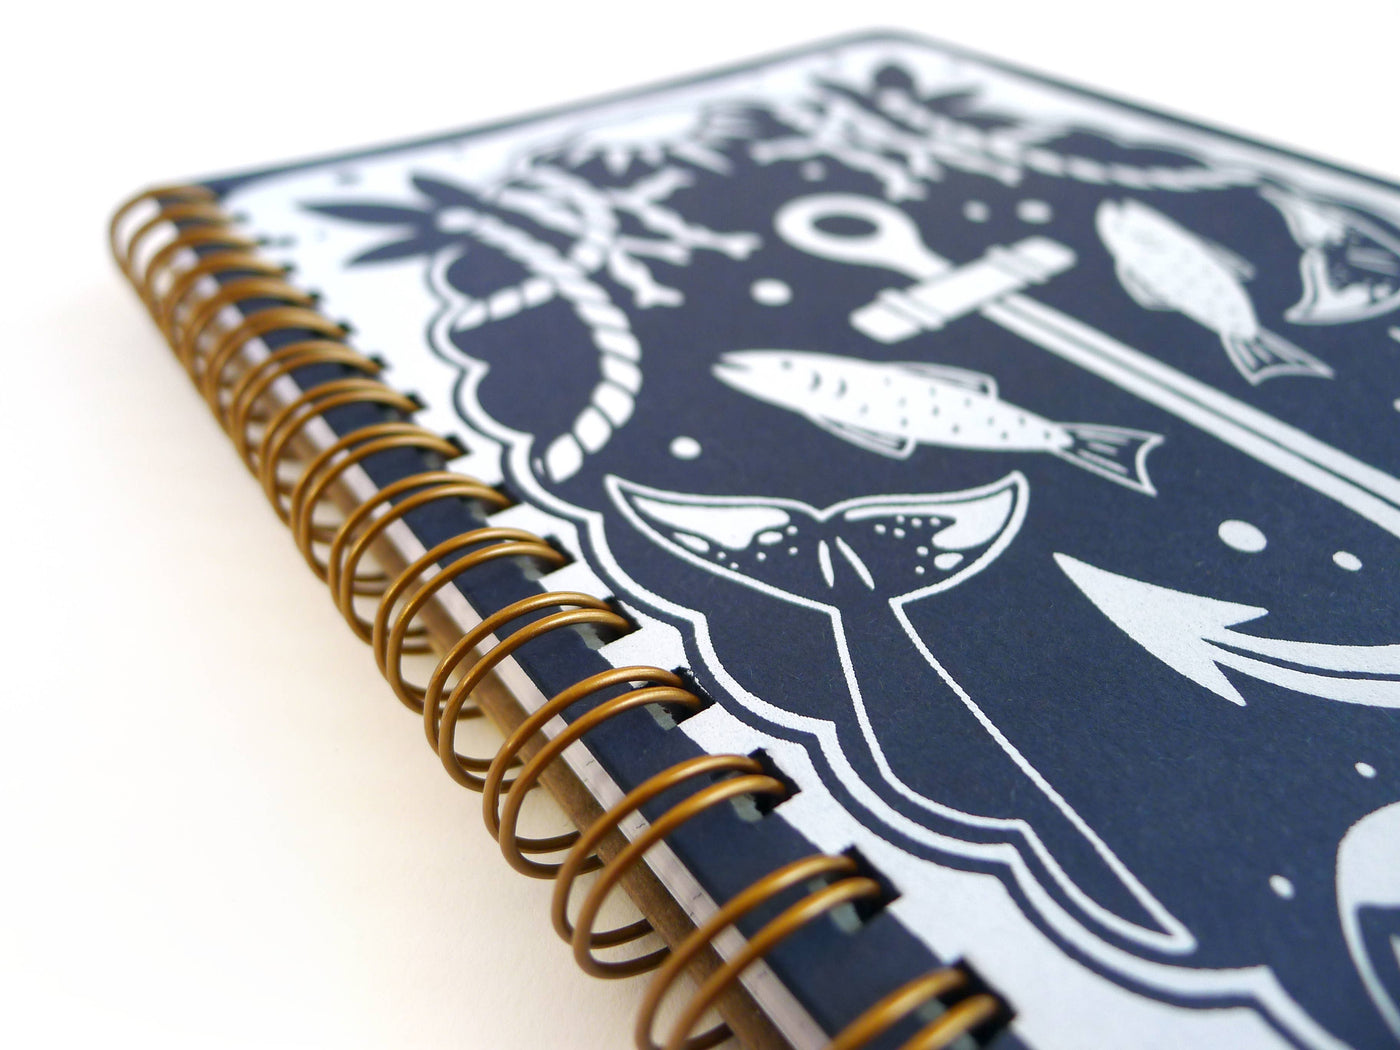 Sailor Coil Notebook, MD